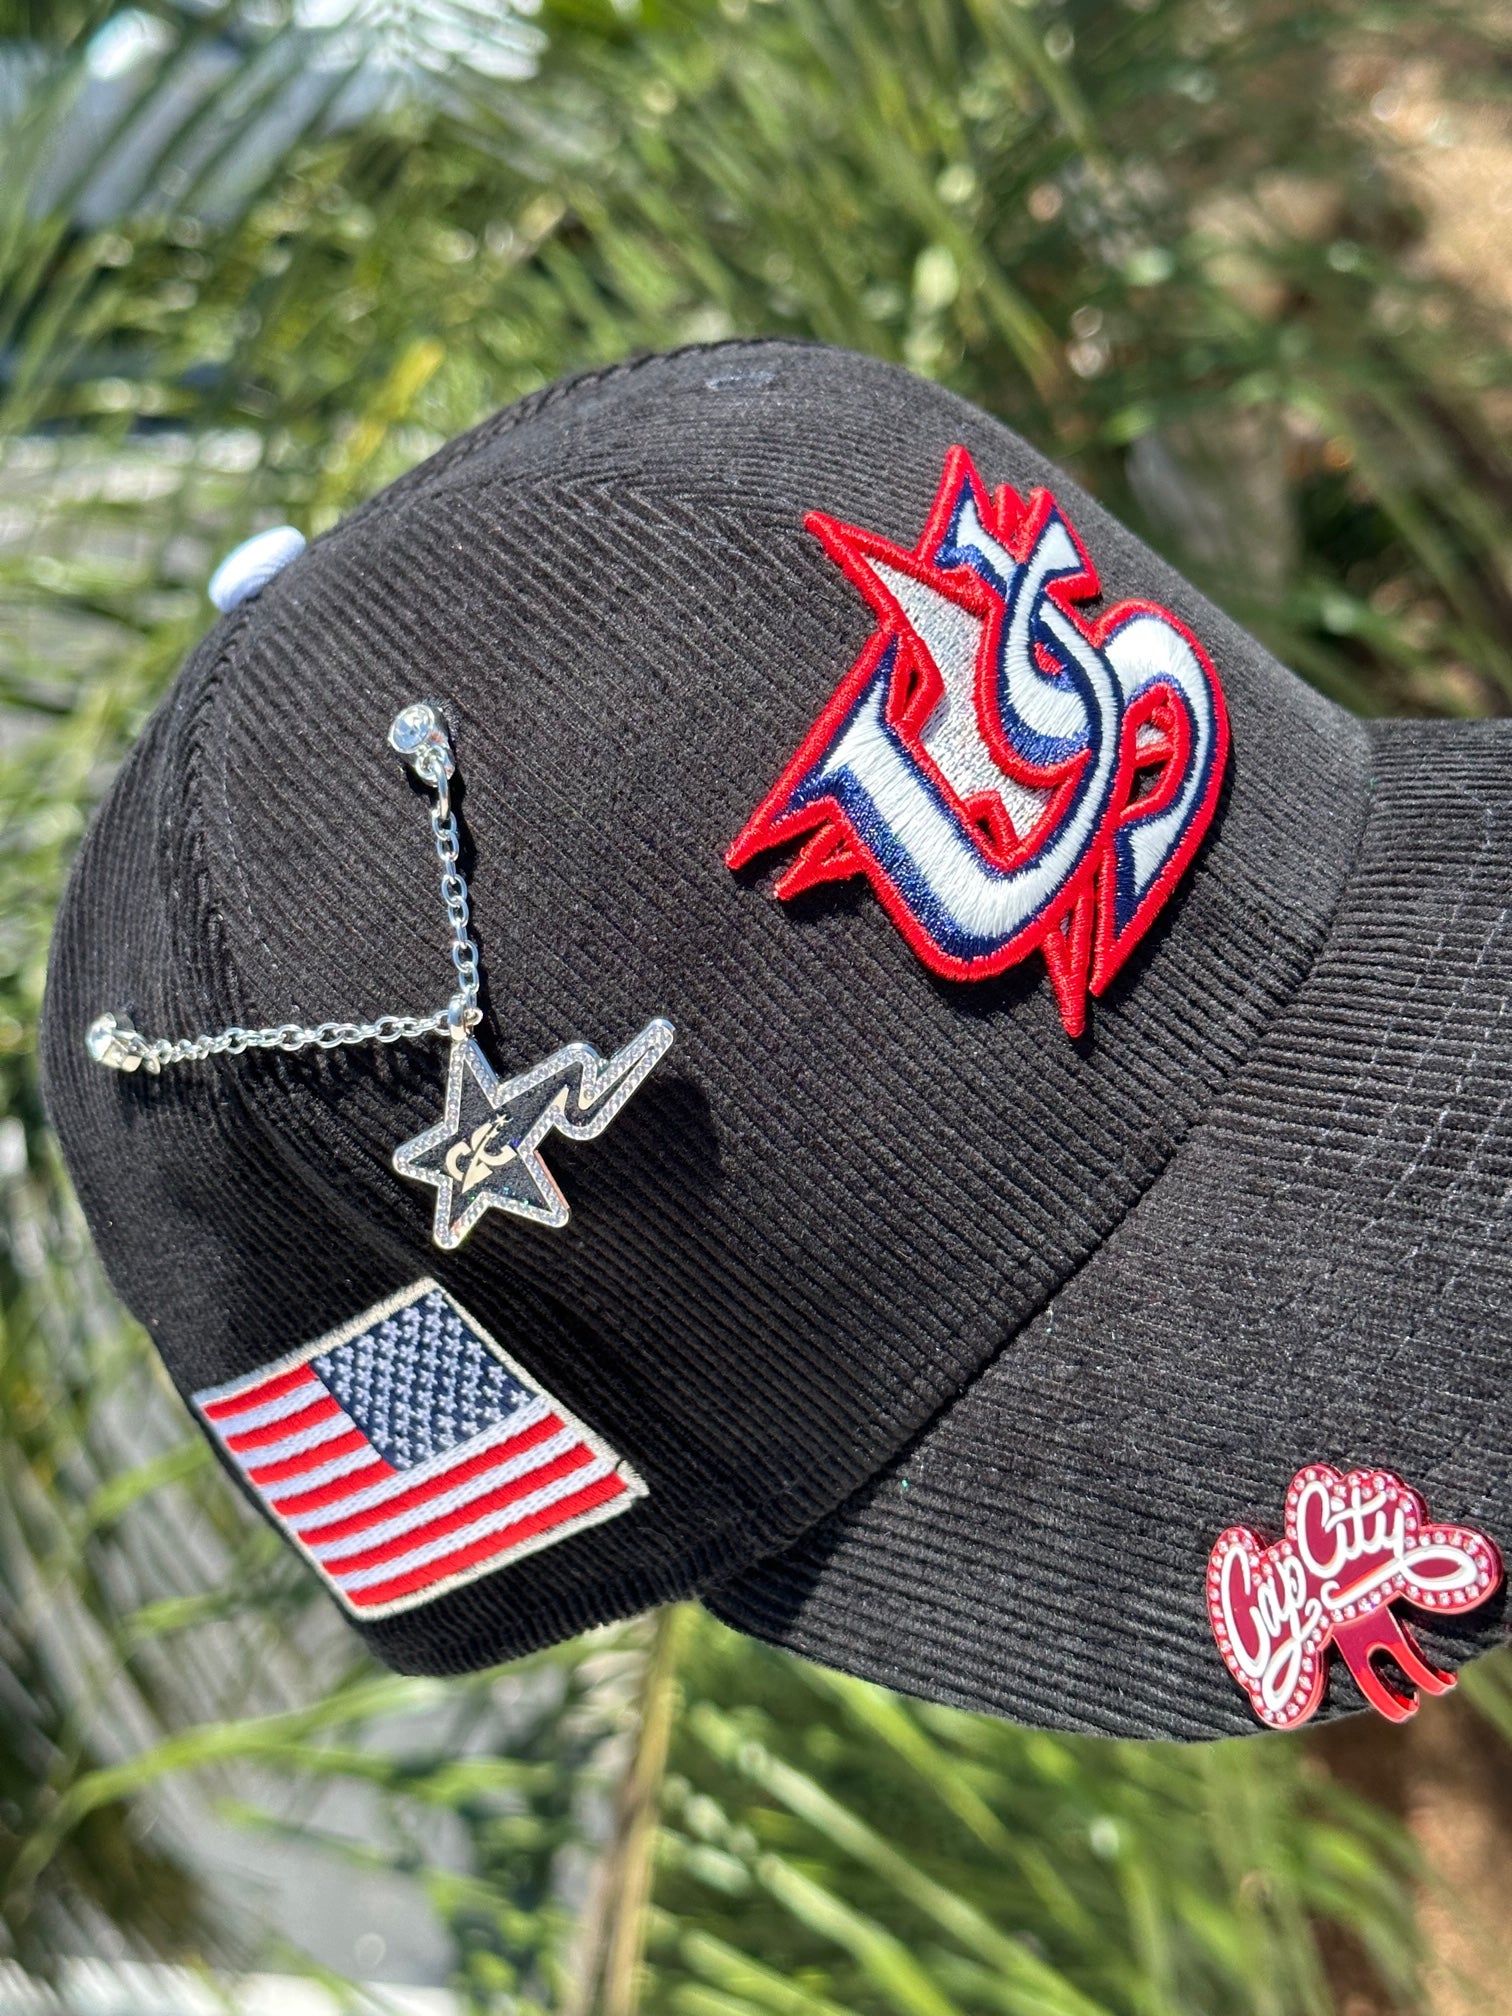 NEW ERA EXCLUSIVE 59FIFTY BLACK CORDUROY UNITED STATES W/ AMERICAN FLAG SIDE PATCH